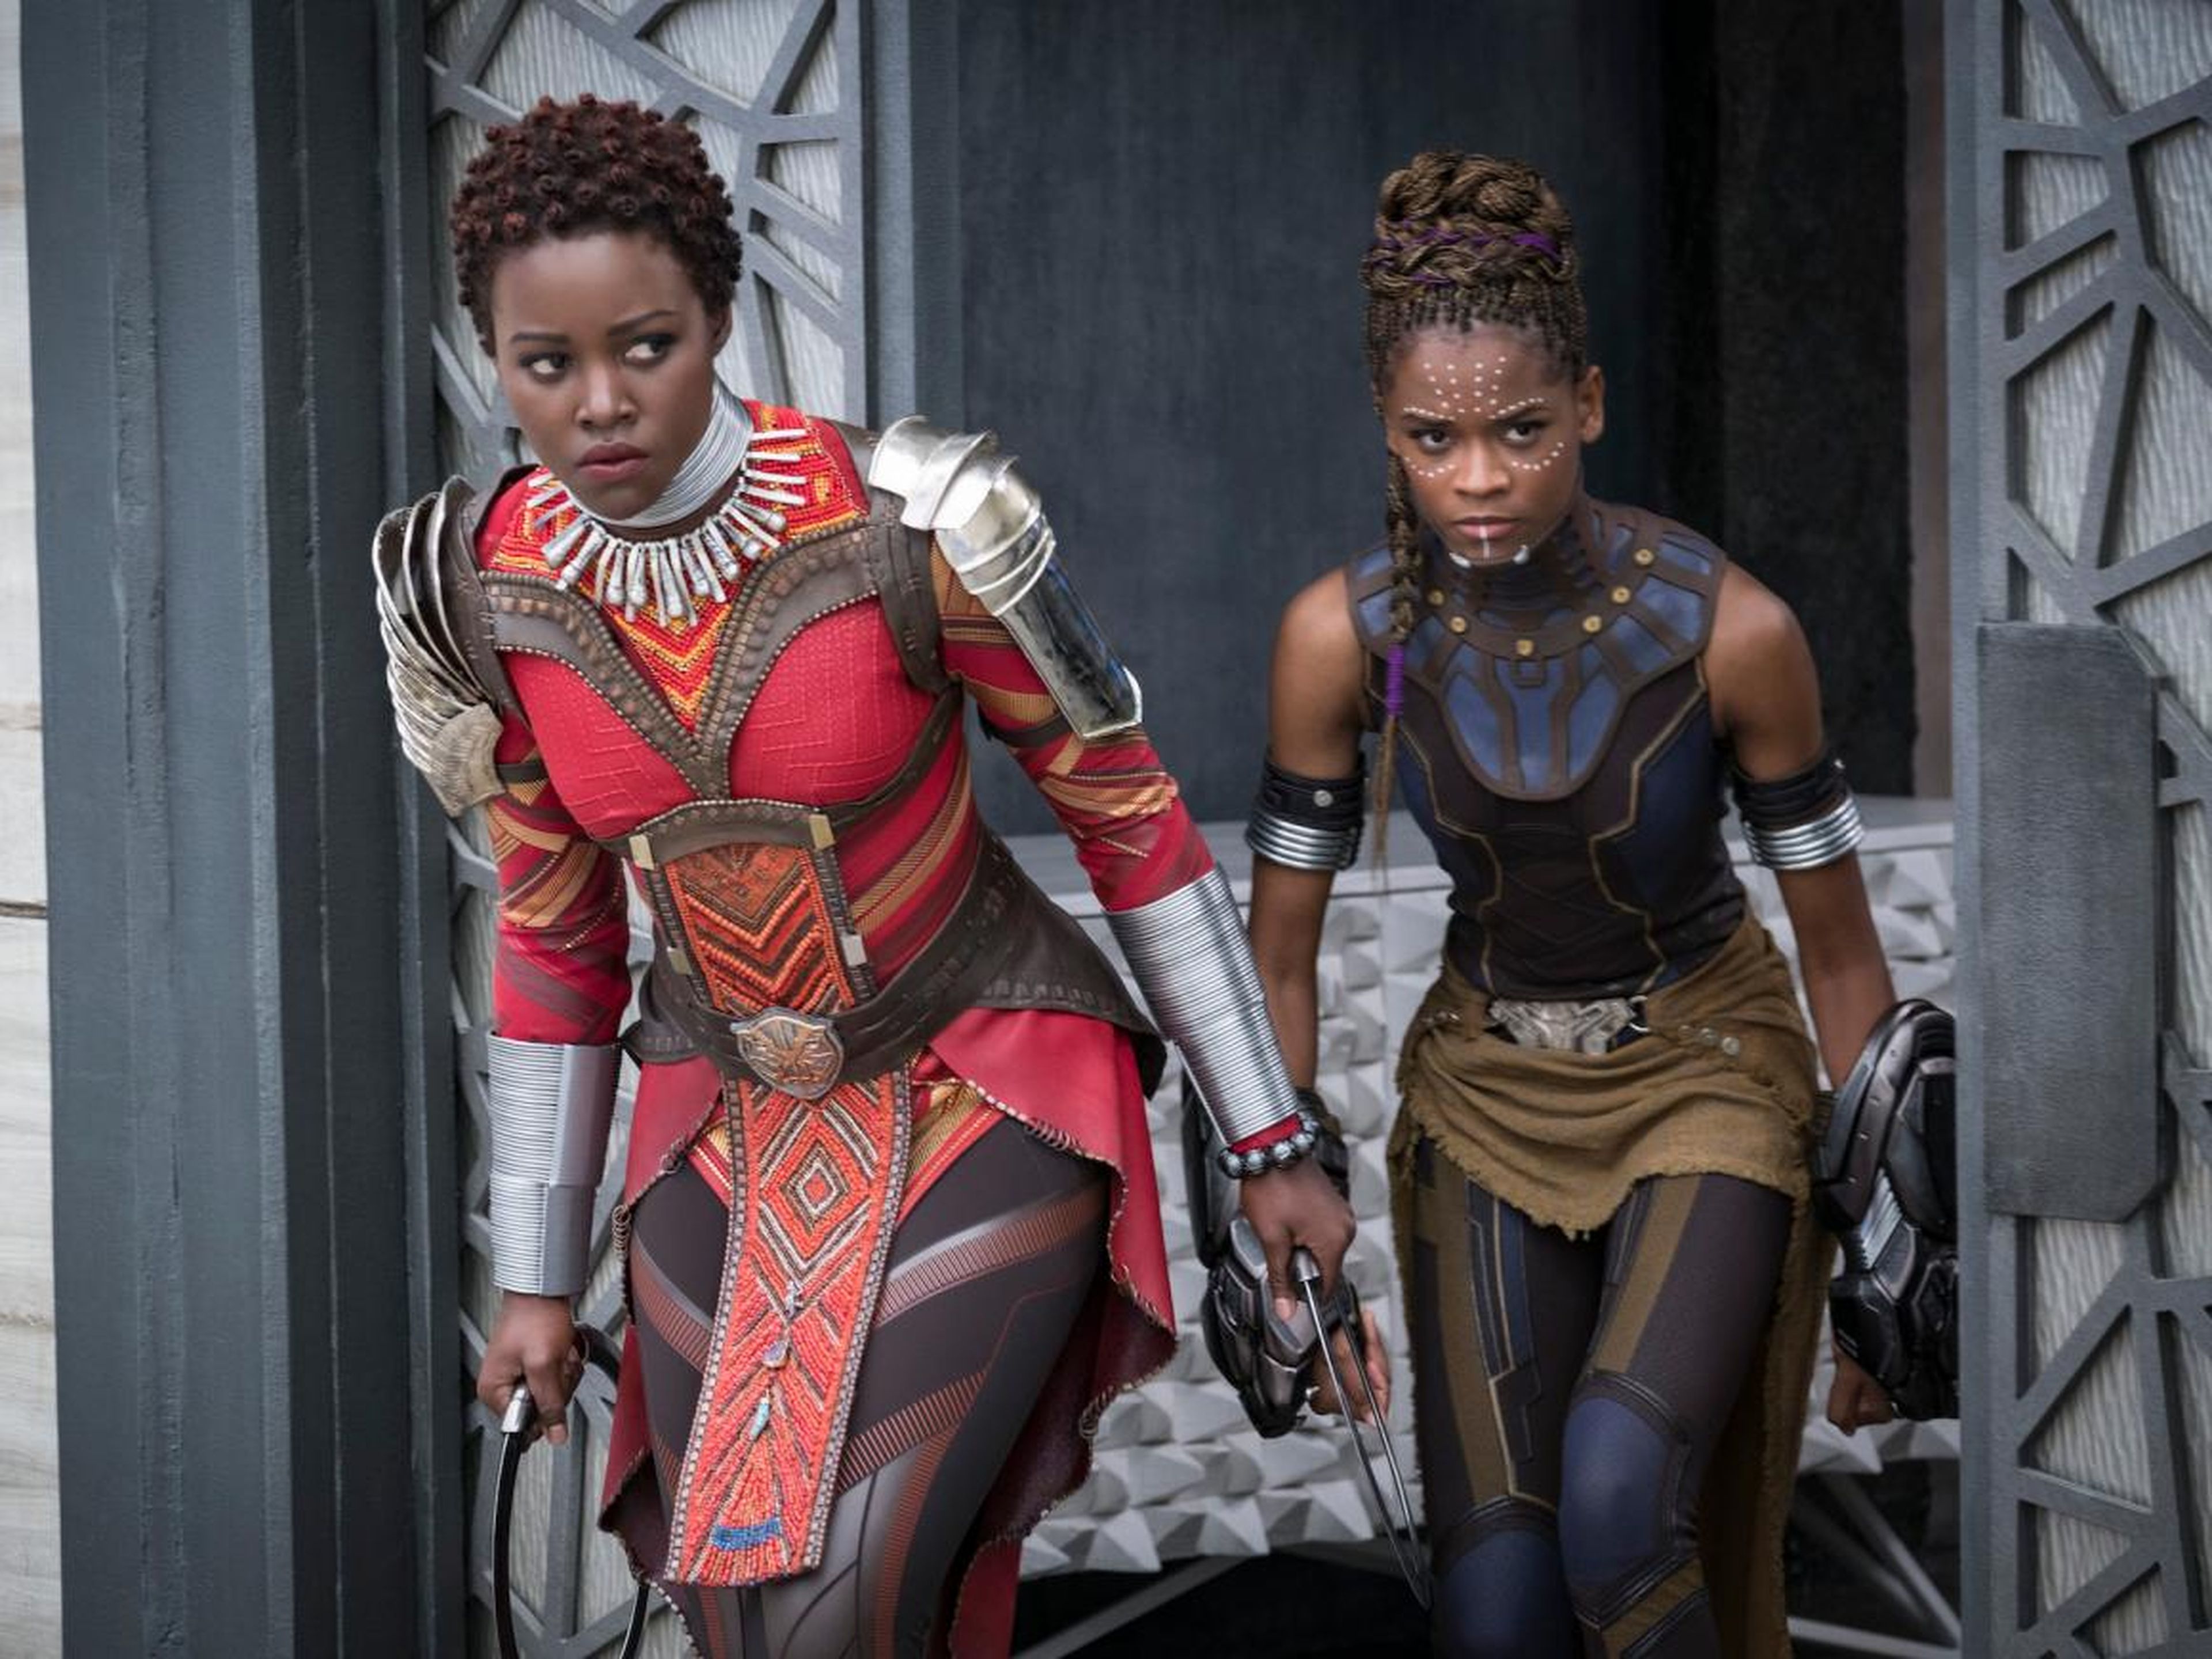 Lupita Nyong'o and Letitia Wright in "Black Panther."